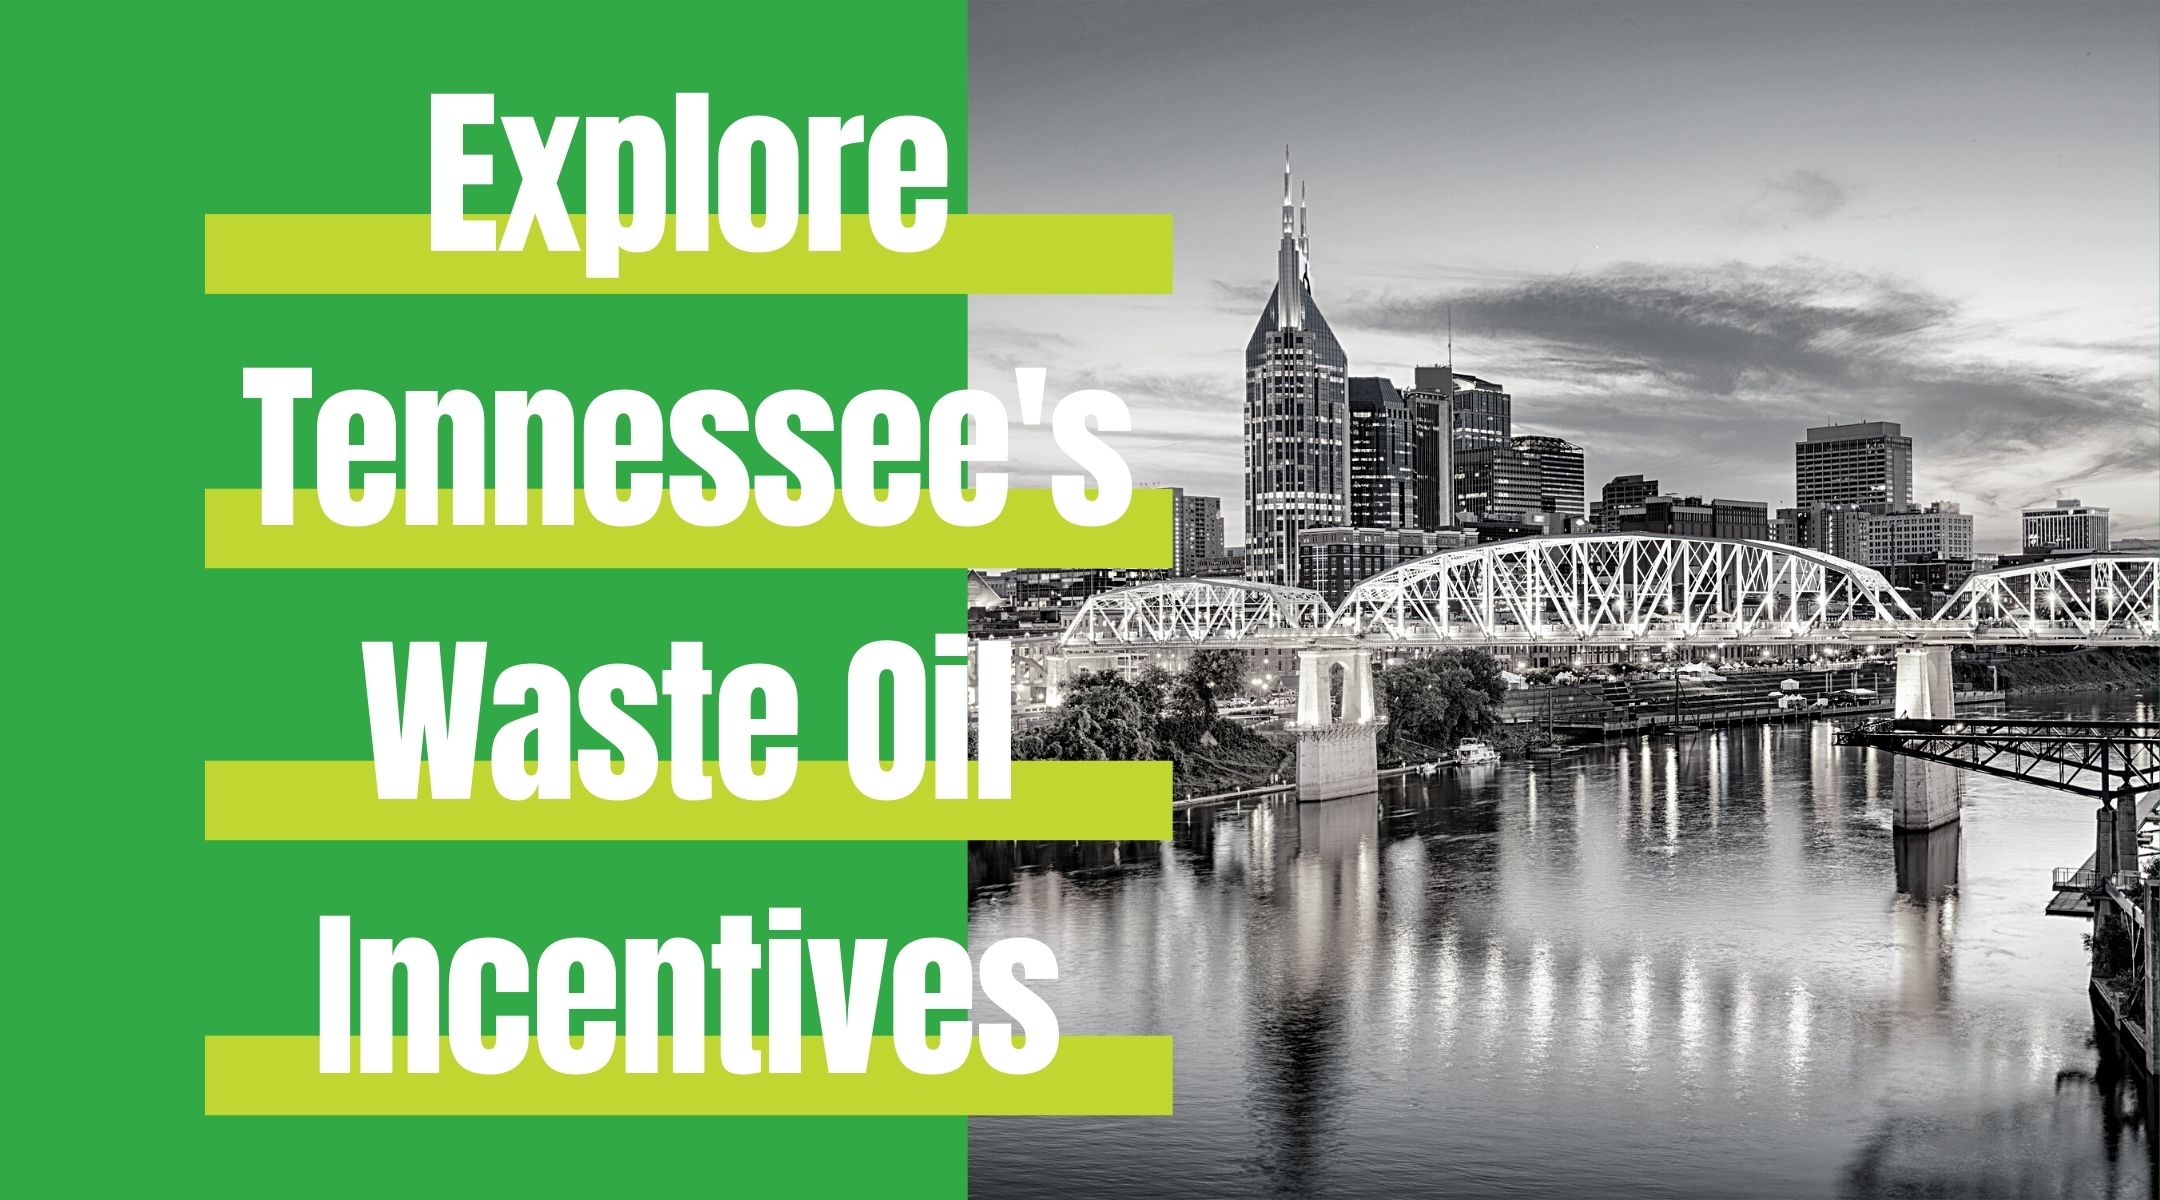 Explore Tennessee’s Waste Oil Incentives